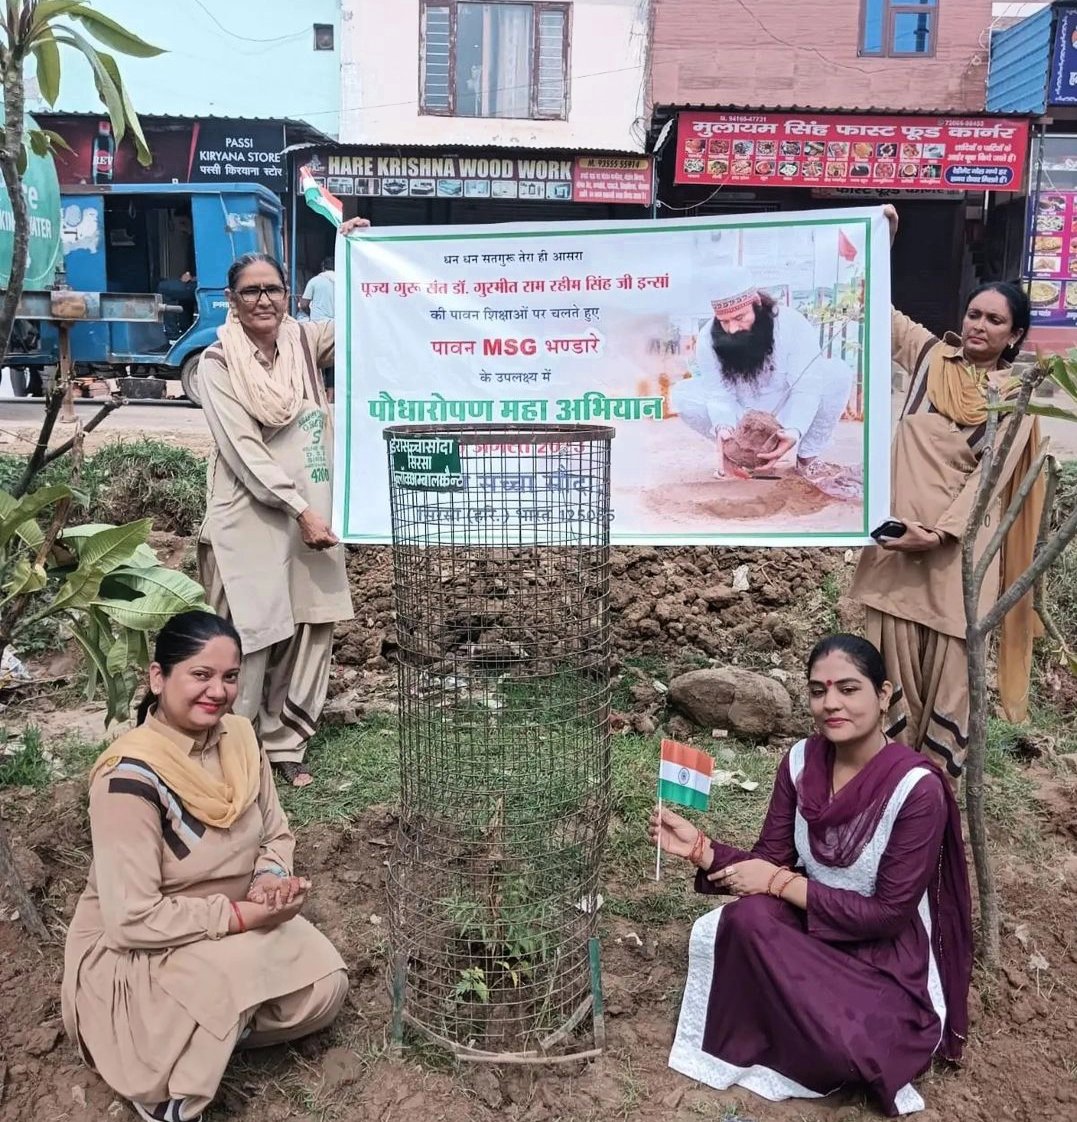 Ram Rahim Singh Ji Insan started the NatureCampaign under which Derafollowers conducttree plantation drives fromtime totime. GuruJi also encouraged millionsof people tocelebrate theirspecial occasion byplantingand nurturing trees which is trulya gift tonature andmankind.#GoGreen